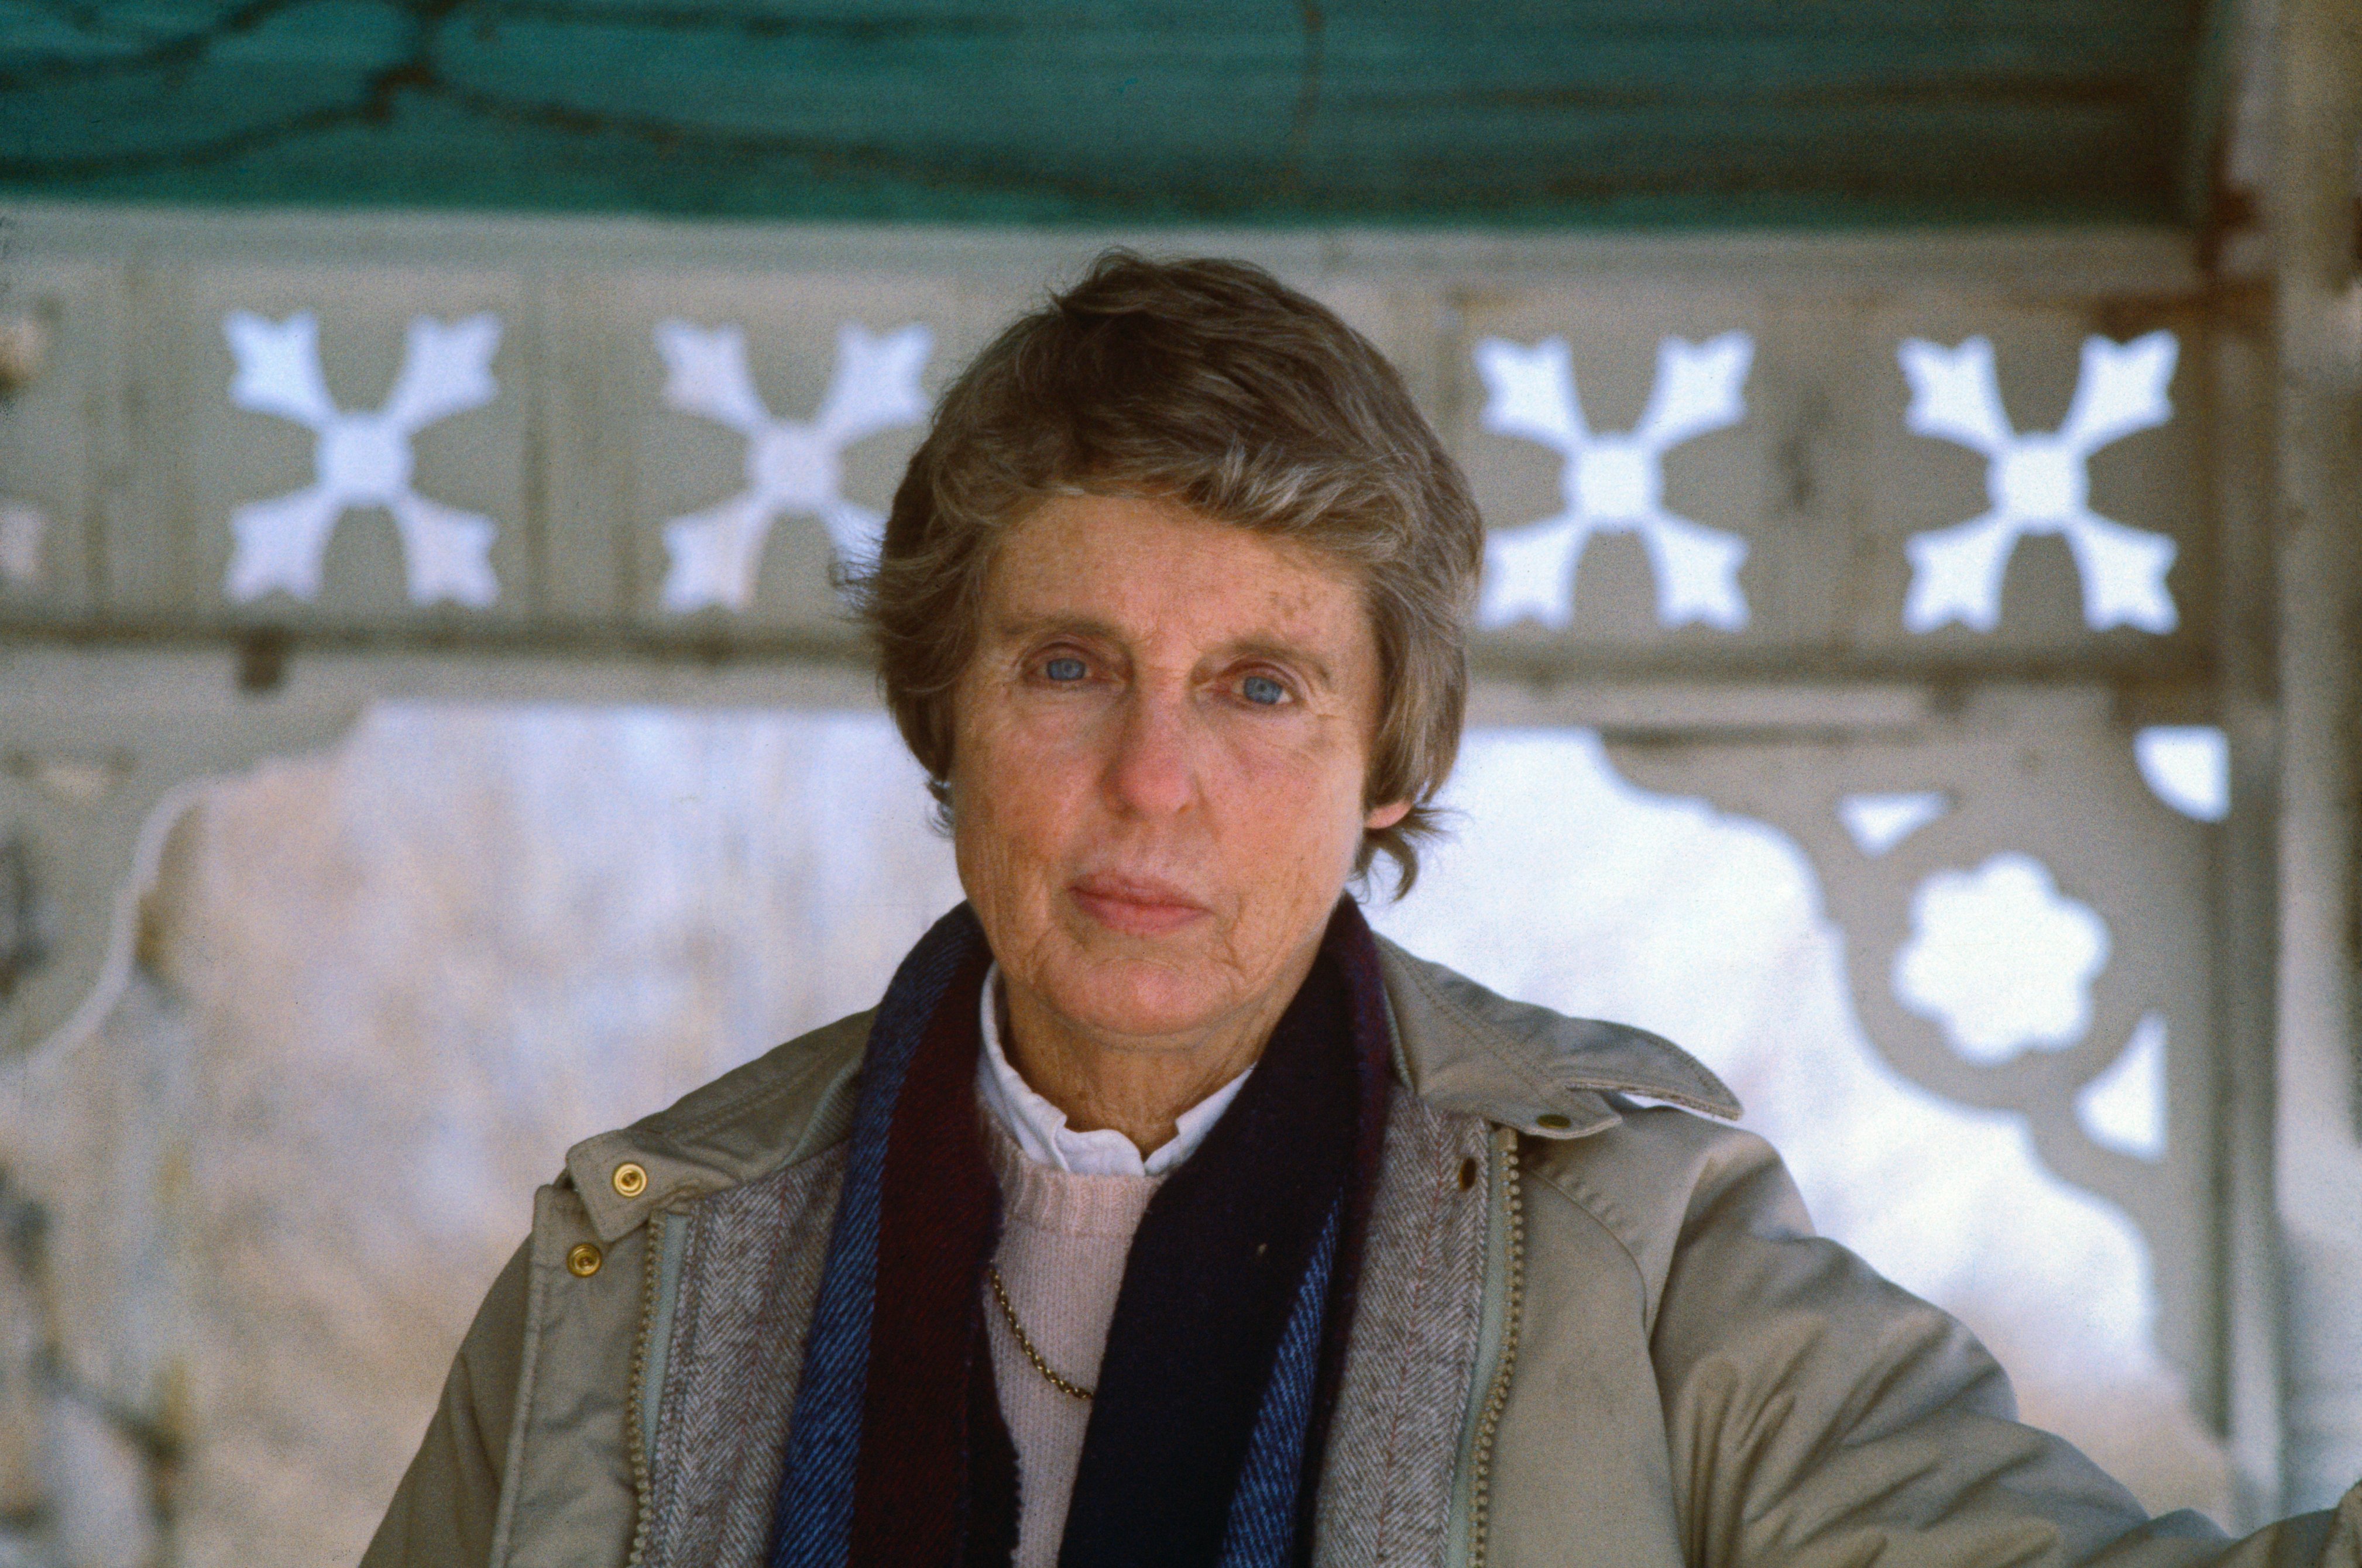 Nancy Kulp as a candidate for Congress from Pennsylvania. | Source: Getty Images